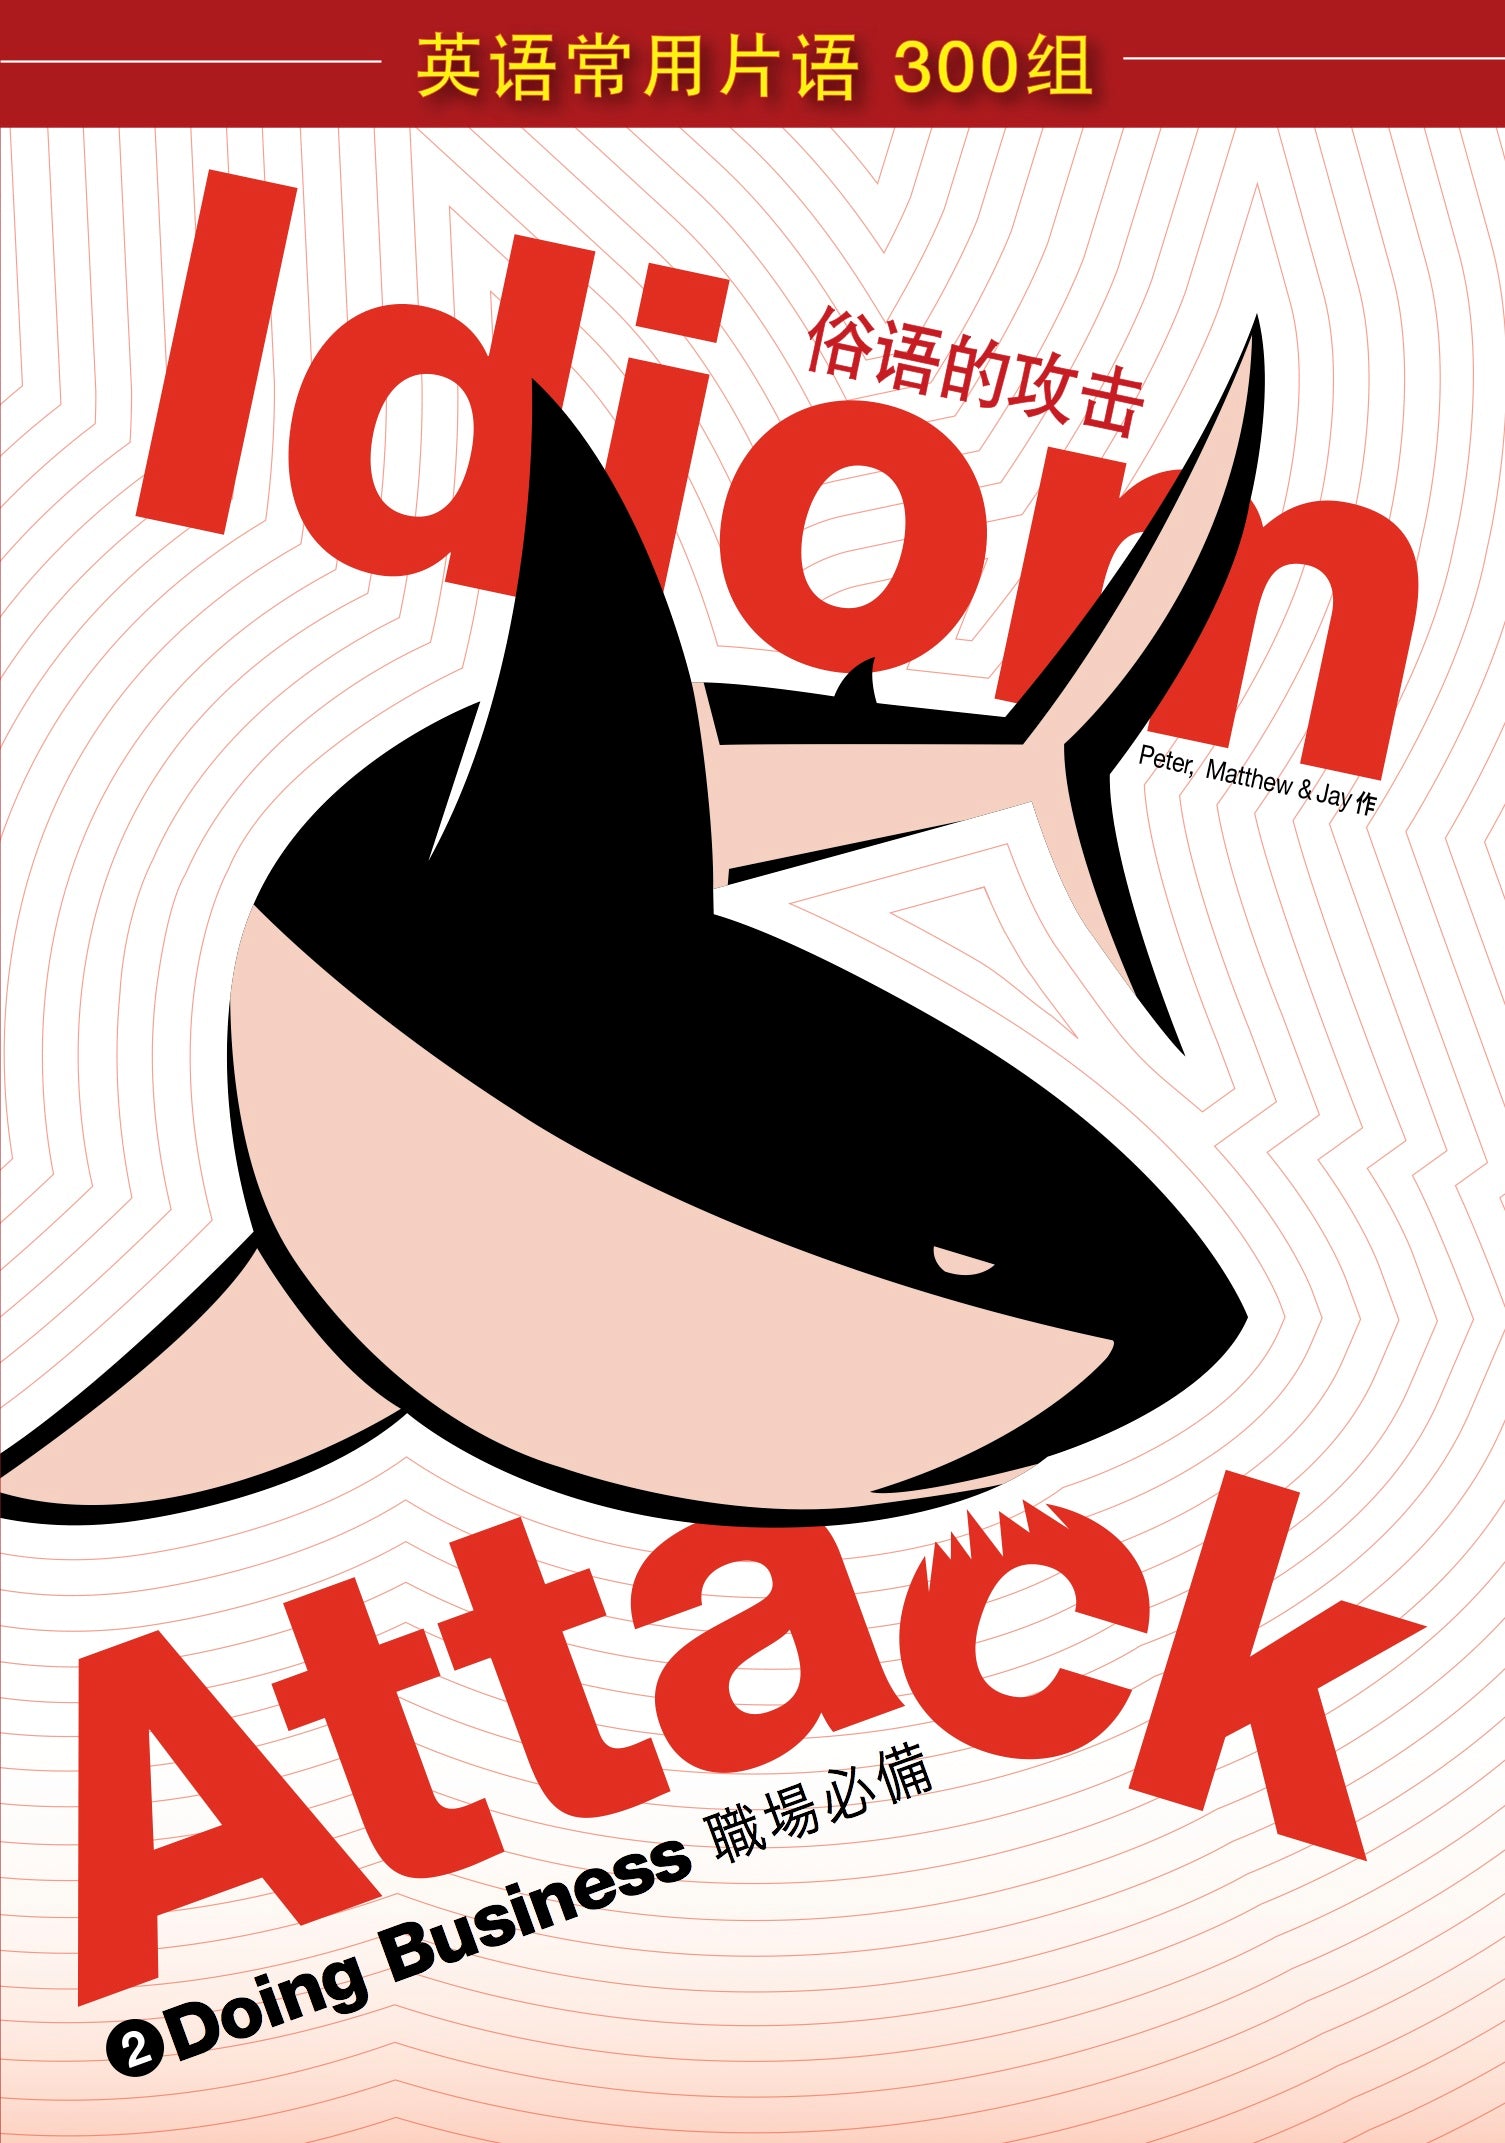 Idiom Attack Vol. 2 - Doing Business (Sim. Chinese Edition): 战胜词组攻击 2 - 职场必备 : English Idioms for ESL Learners: With 300+ Idioms in 25 Themed Chapters w/ free MP3 at IdiomAttack.com